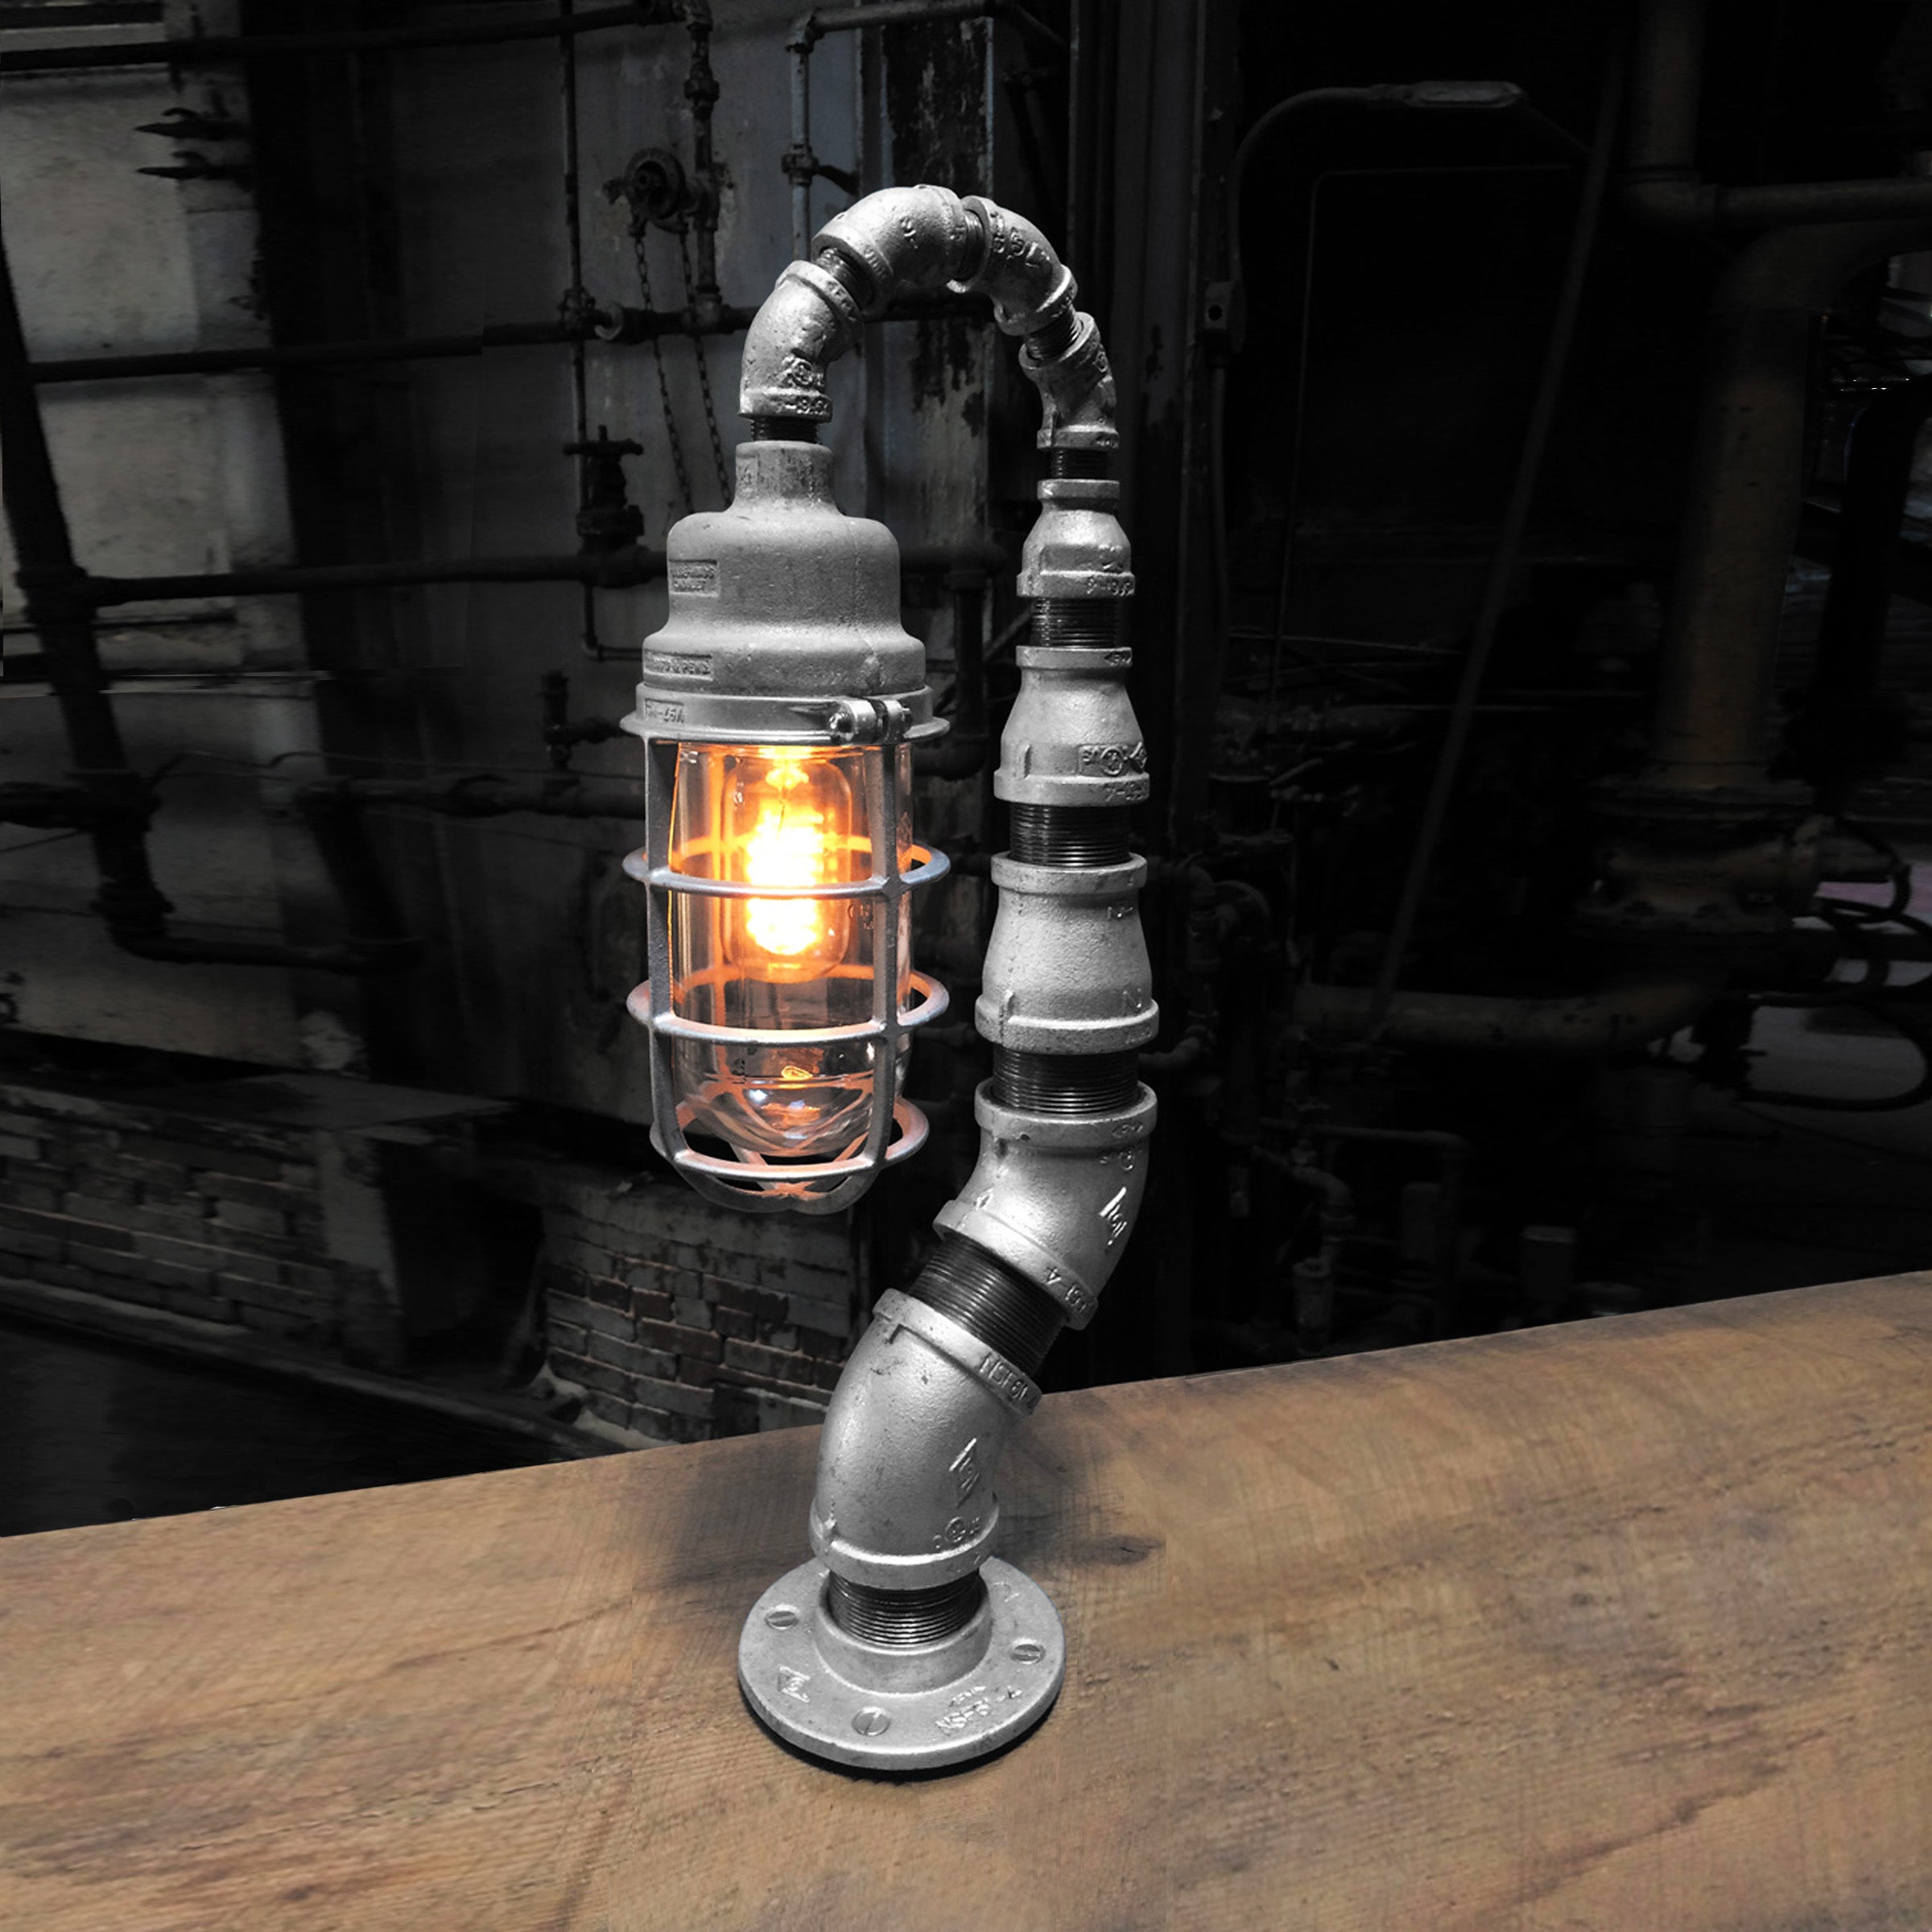 Modern Industrial Table Lamp - Industrial Decor - Crouse Hinds Industrial Light For Sale